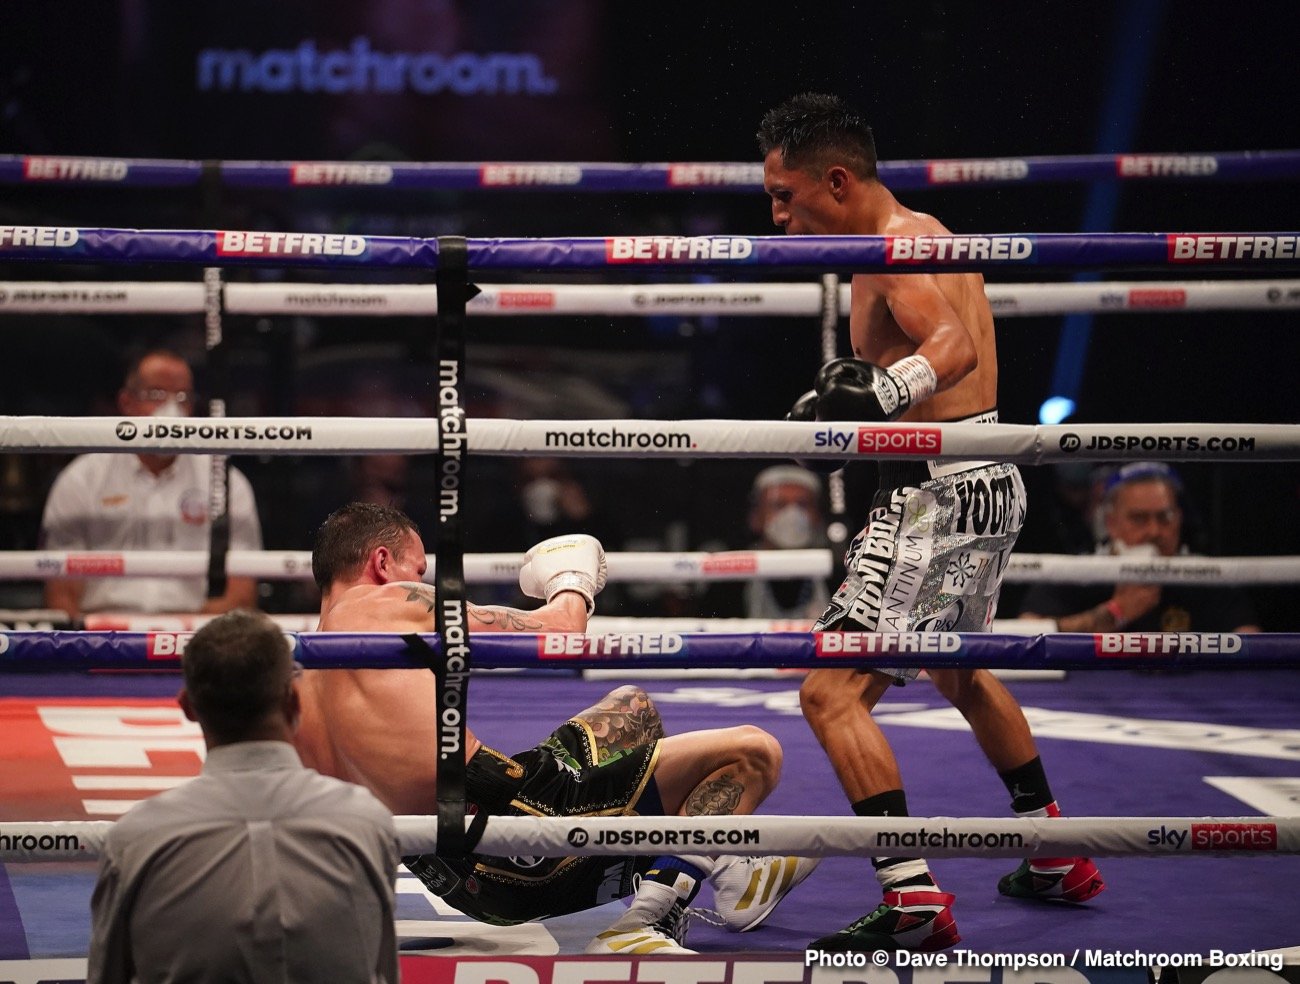 Image: Warrington suffered an injured jaw, Hearn unsure about rematch